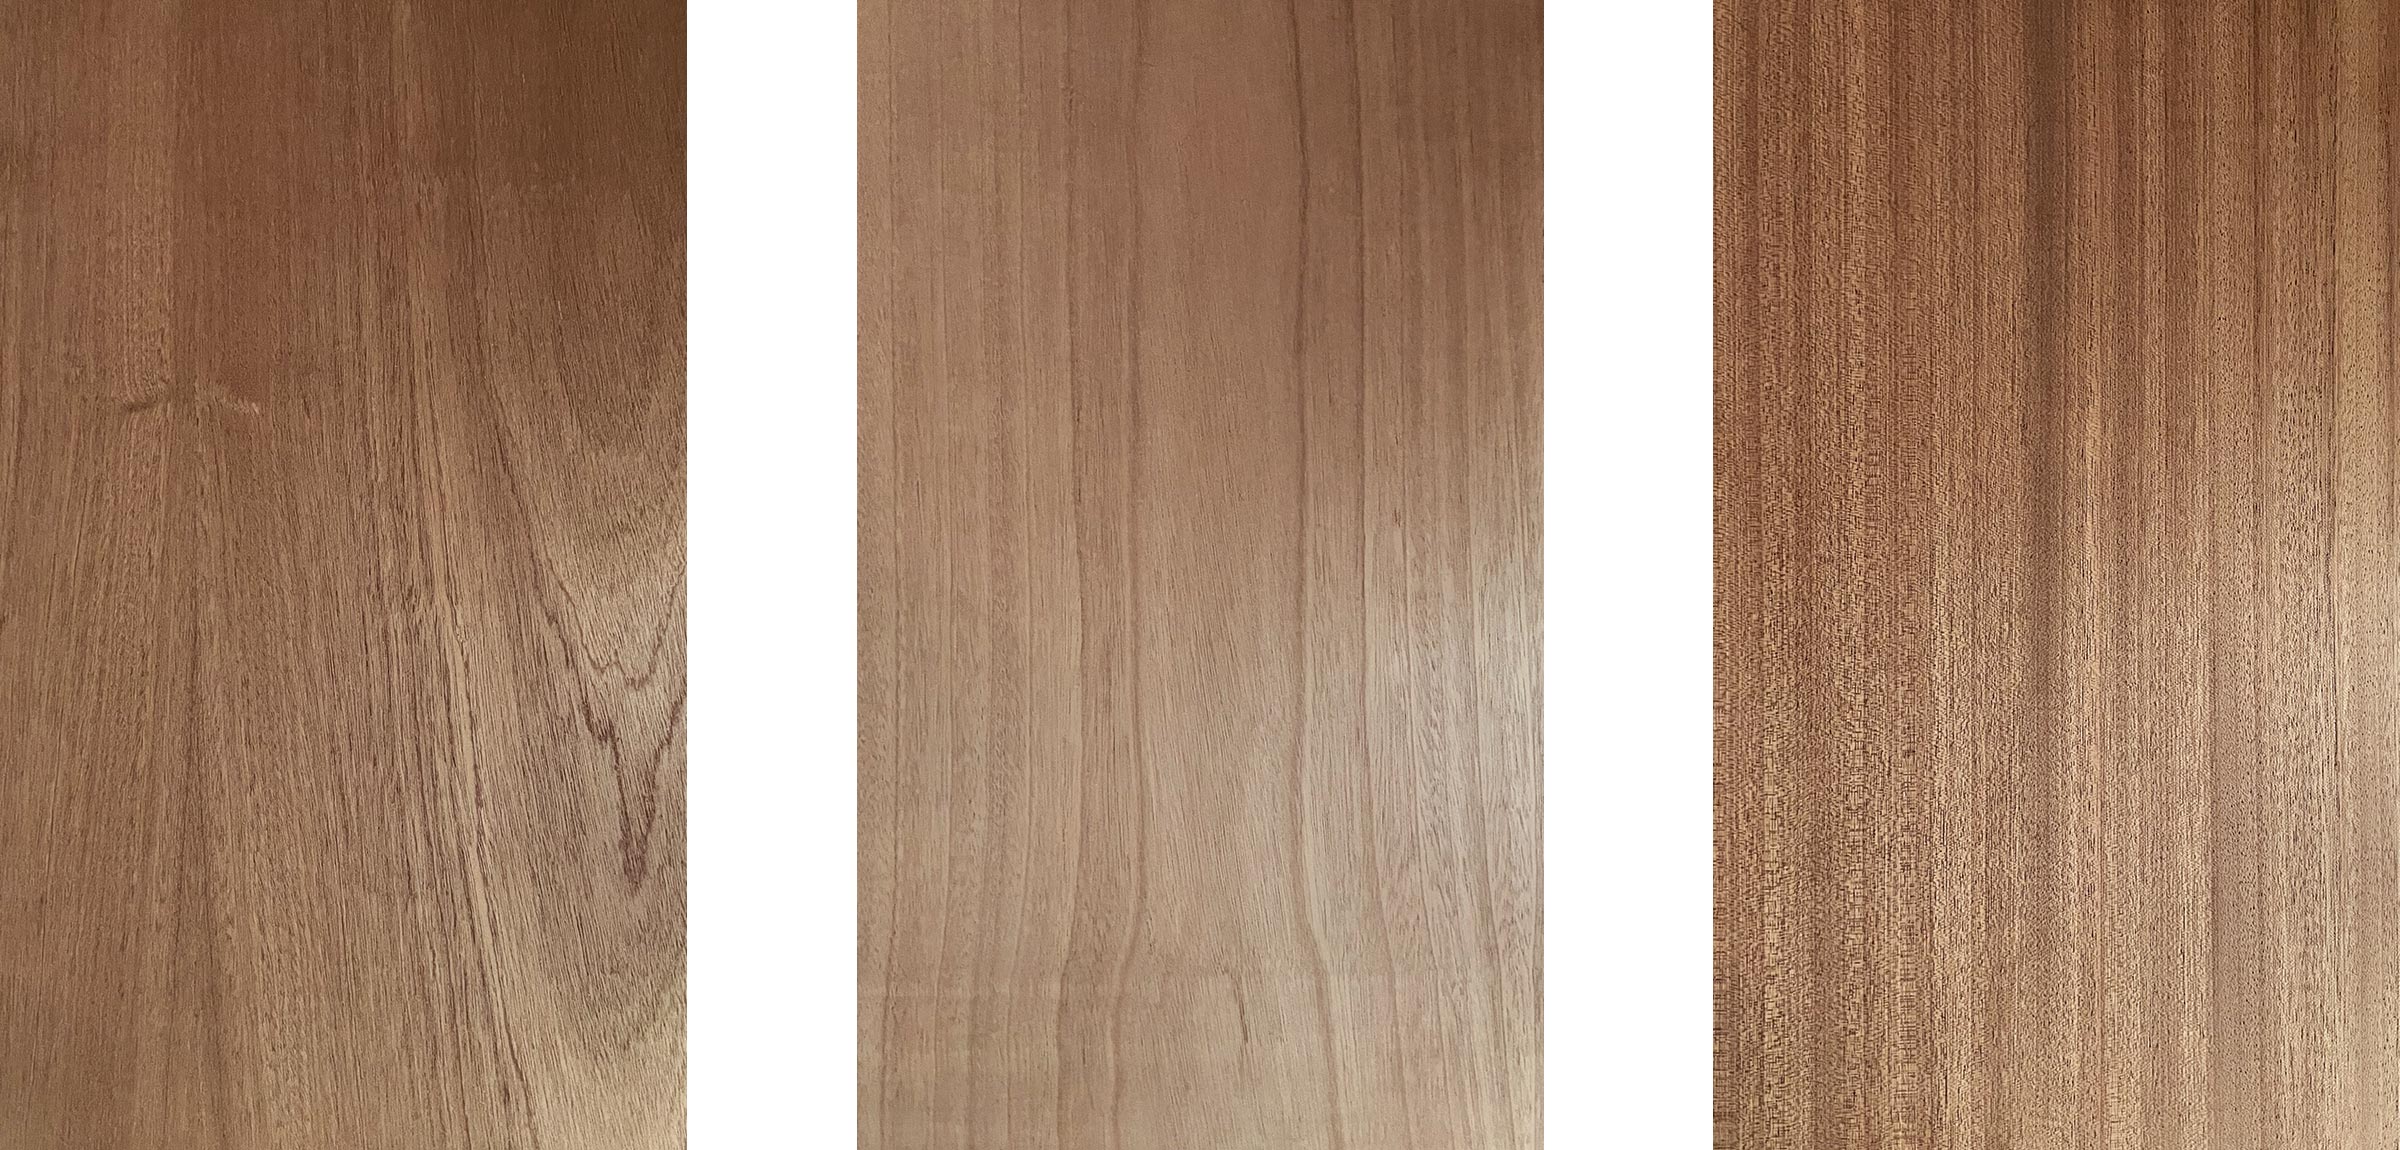 Differences among boards of sapele wood.